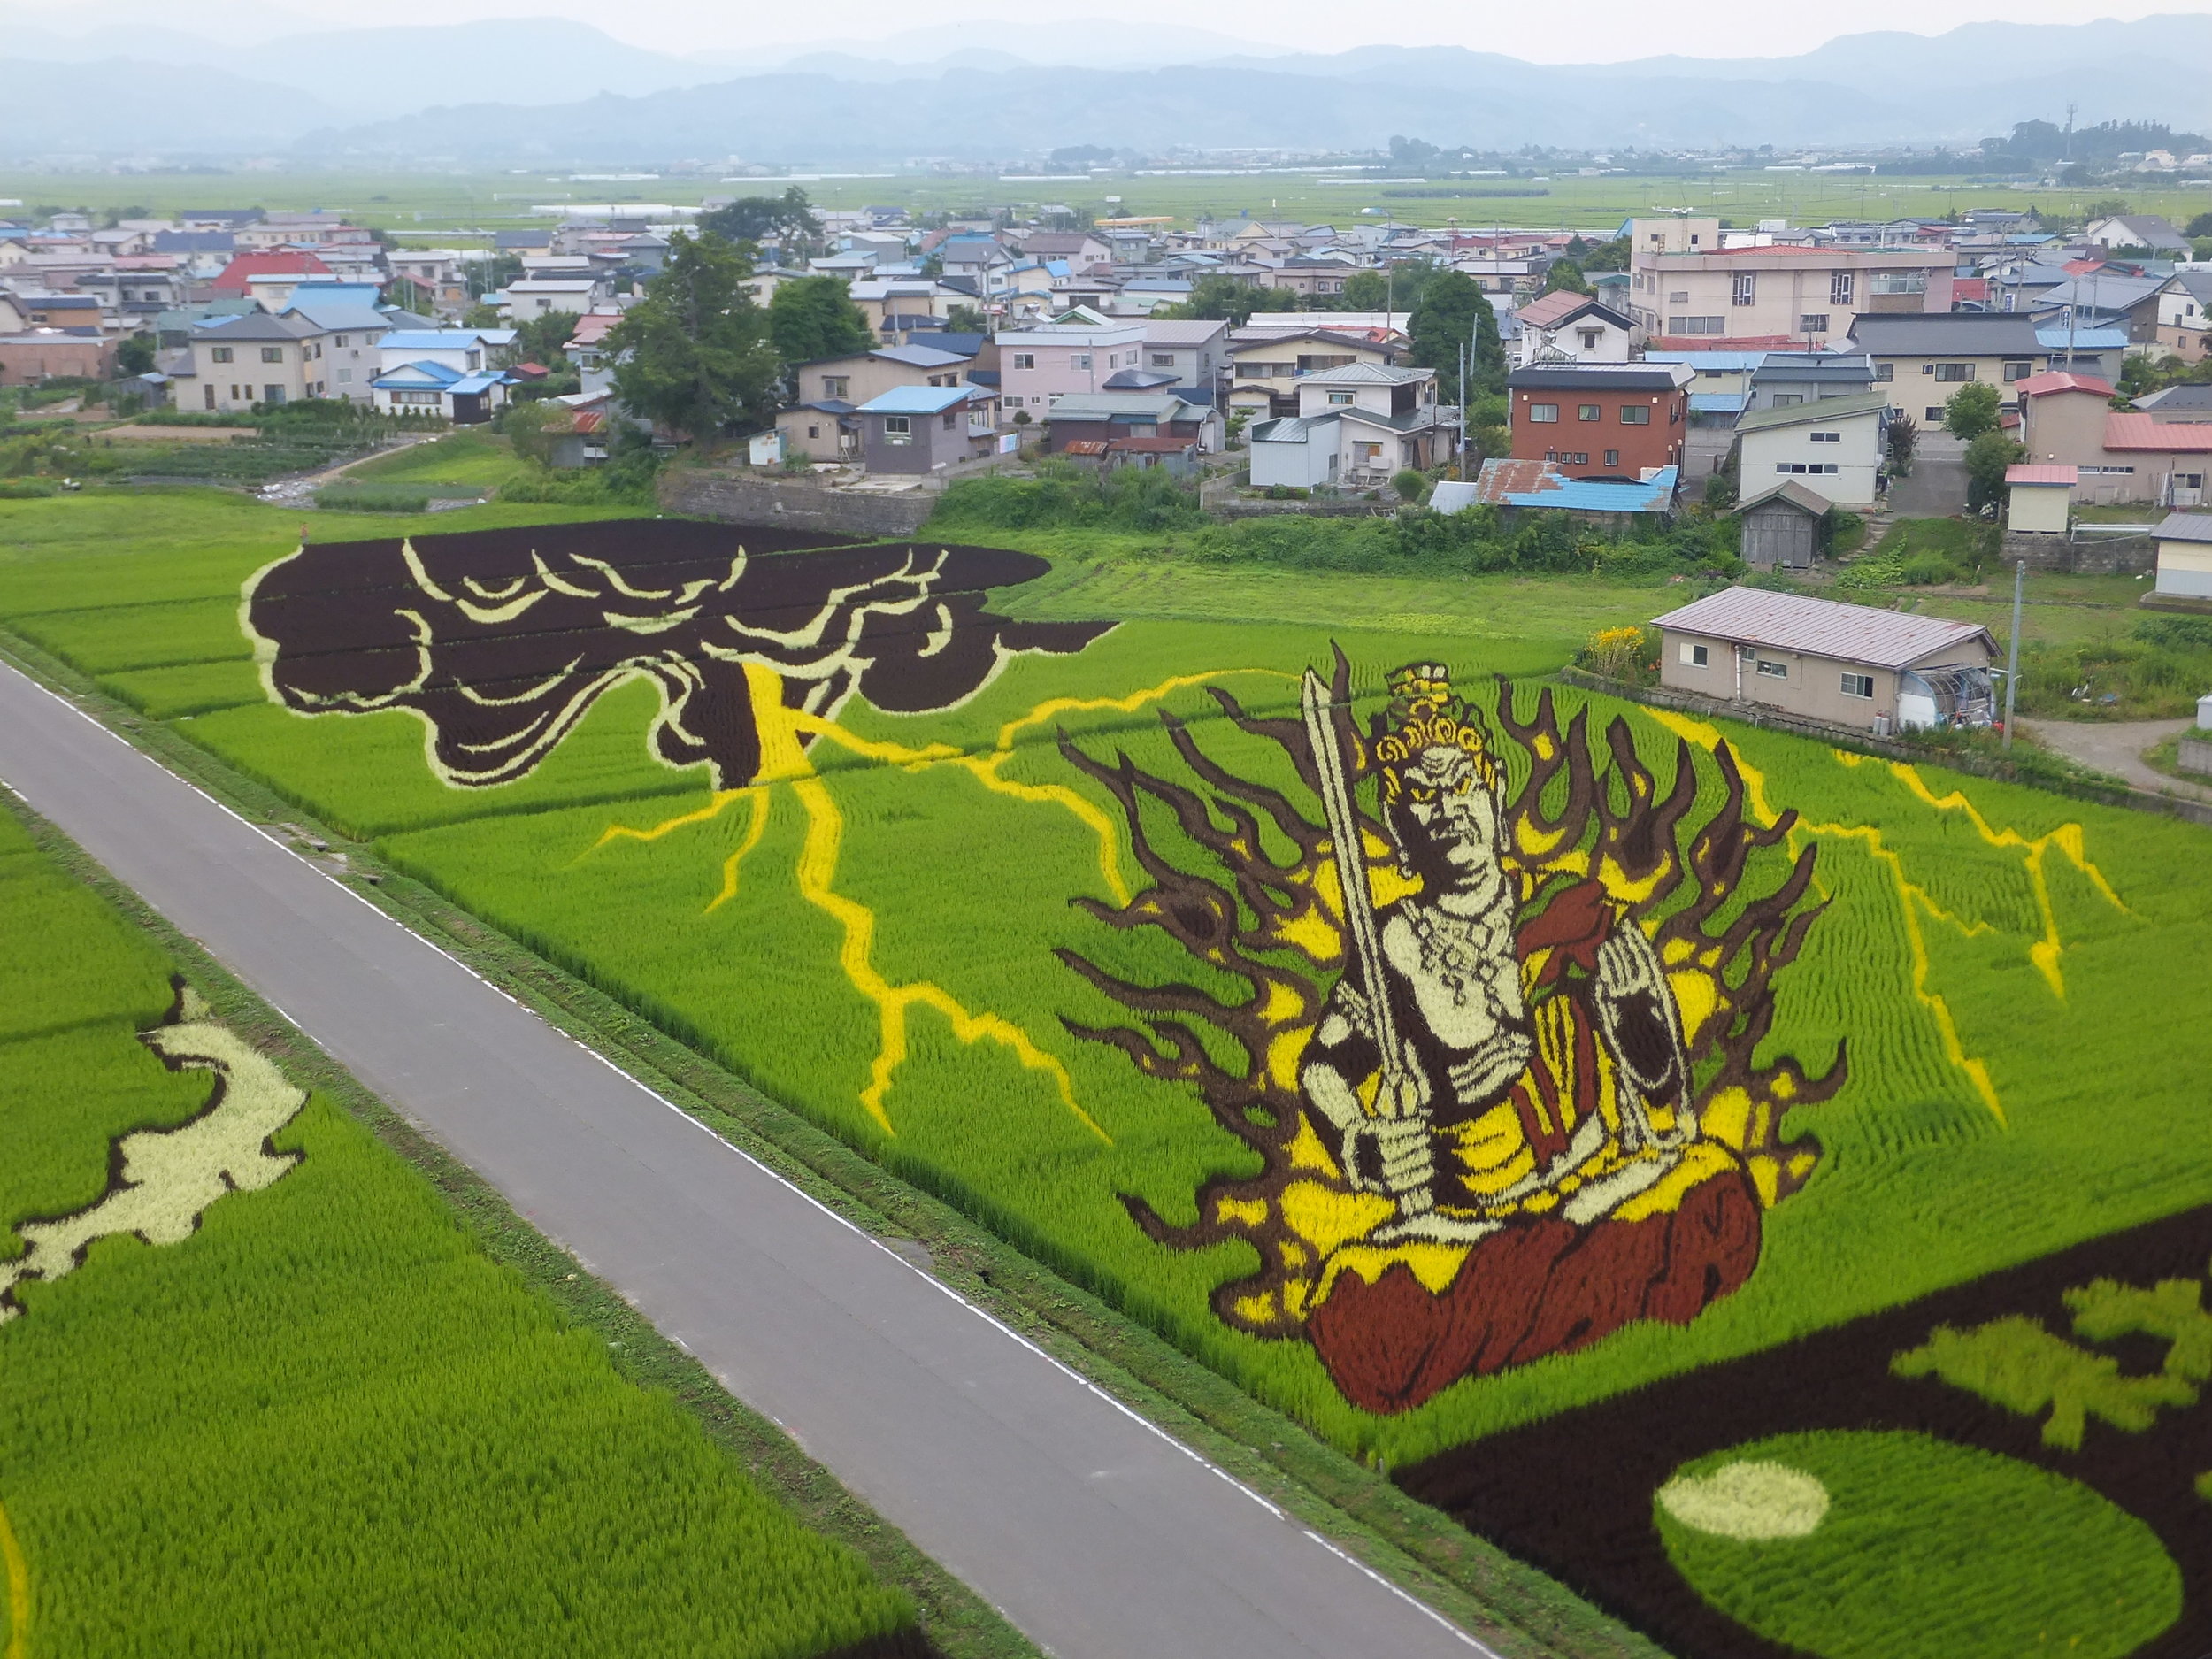 Grainy views are a good thing: A village in Japan uses rice paddies as canvases for art (American Way)